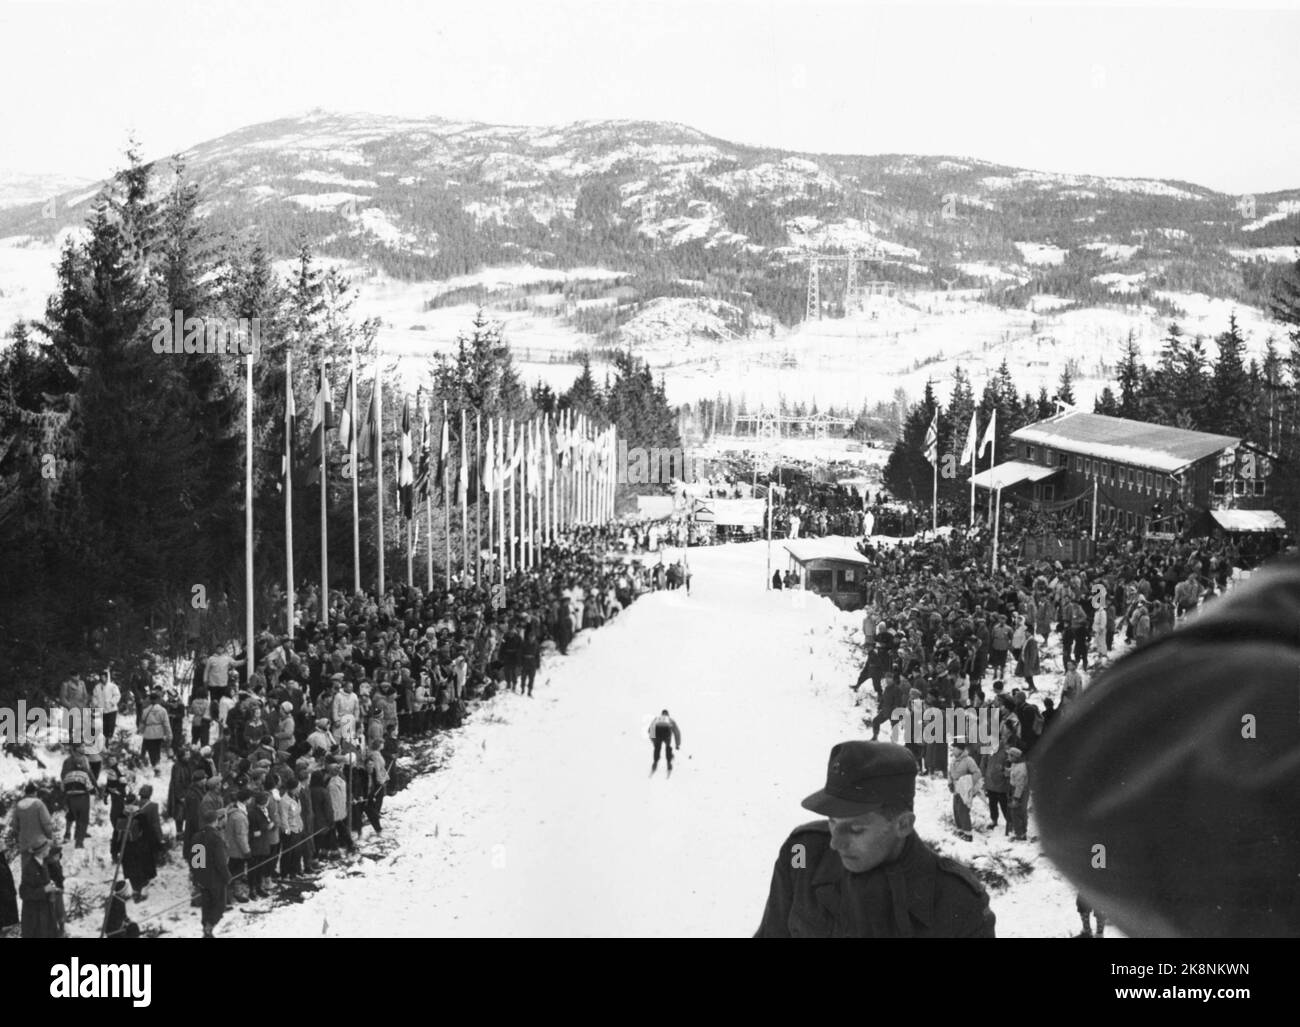 Winter Olympics 1952, Oslo. Stork slalom and downhill for women and men went on Norefjell. Here from the ground, with many spectators dressed in contemporary 50s fashion. People cost themselves in the ground. Photo: NTB / Archive / NTB Stock Photo